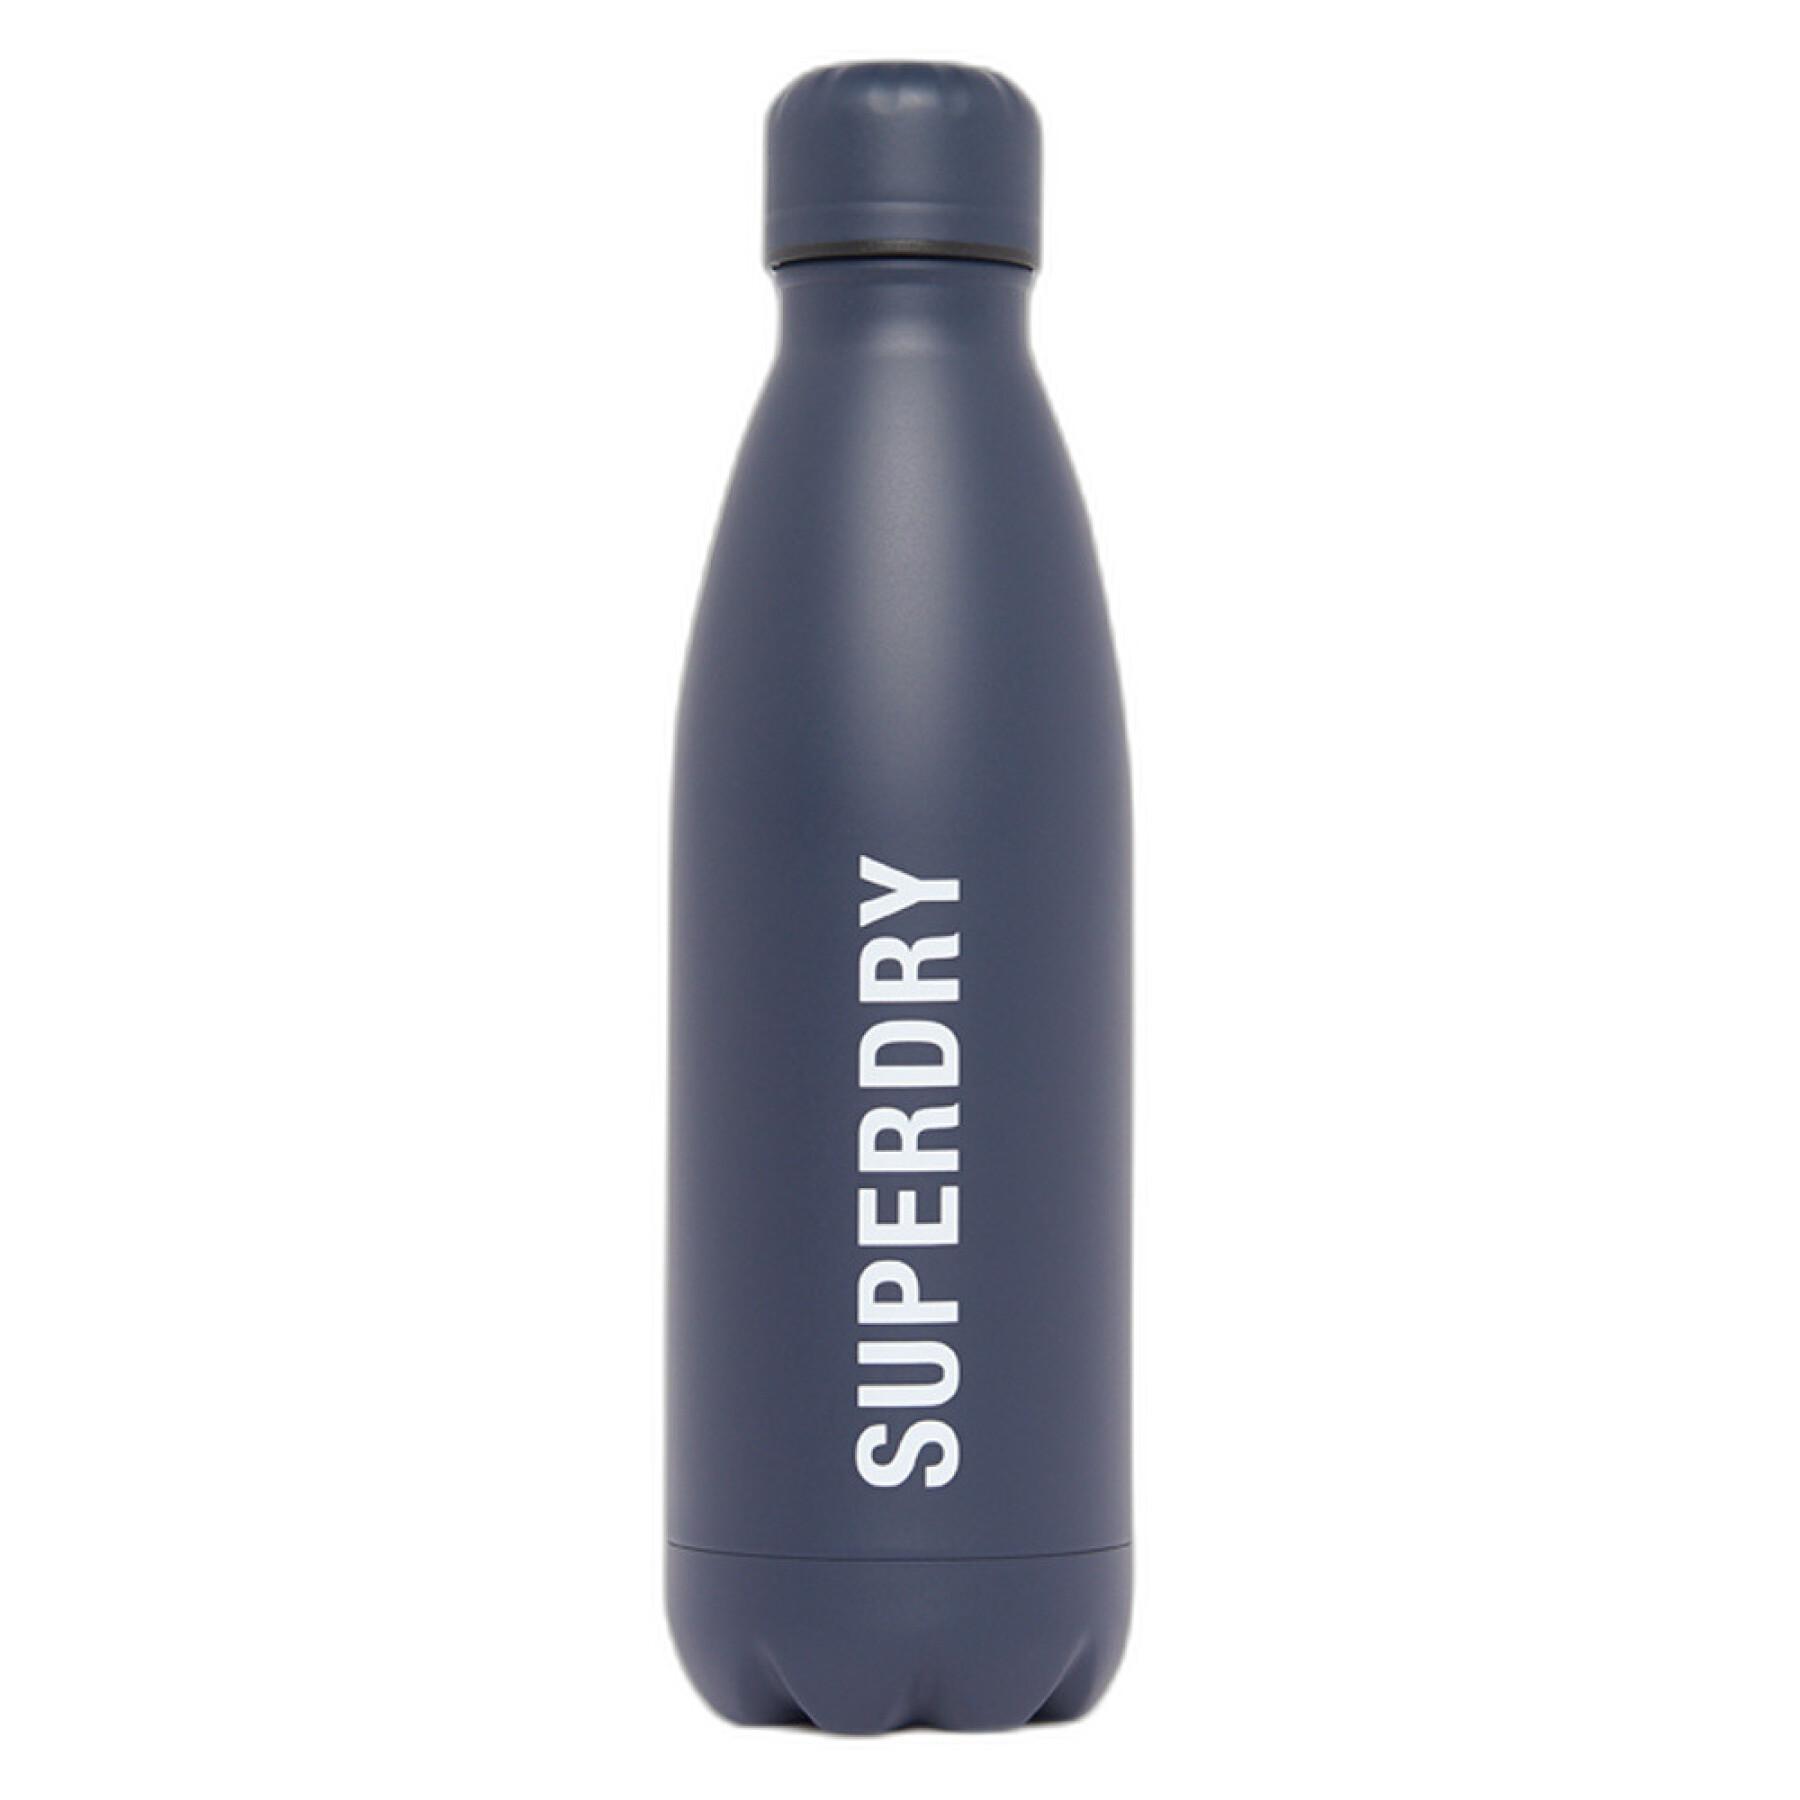 Fles Superdry Sportstyle